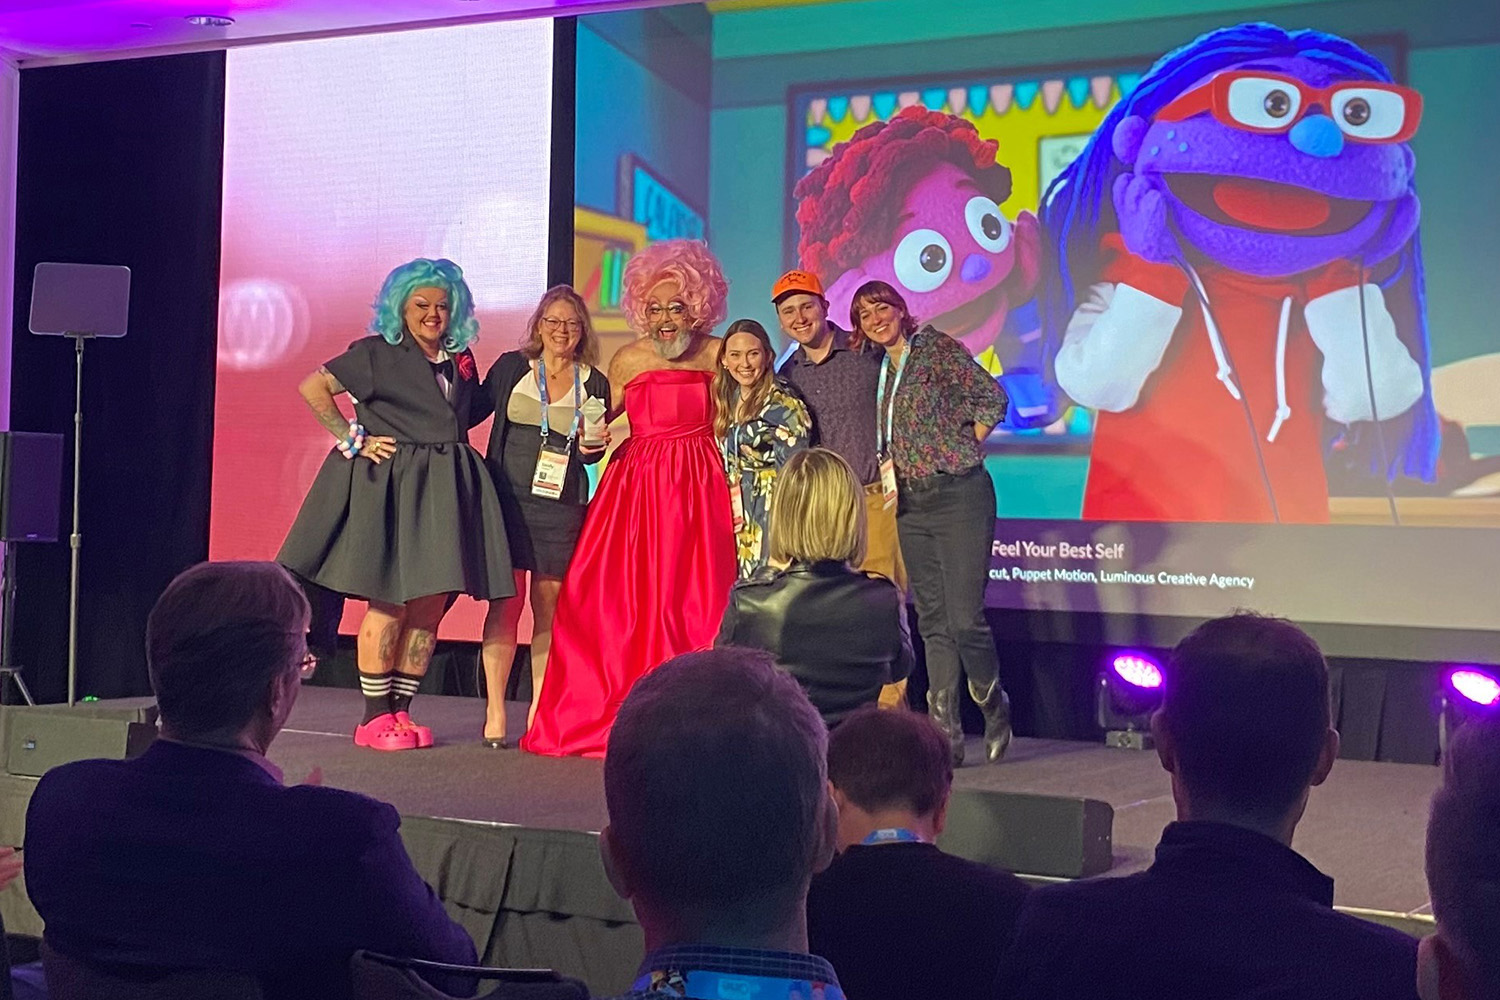 Team members from UConn’s Feel Your Best Self project upon winning the “Best Web/App Series — Original” category at the Kidscreen Awards in Miami in February.